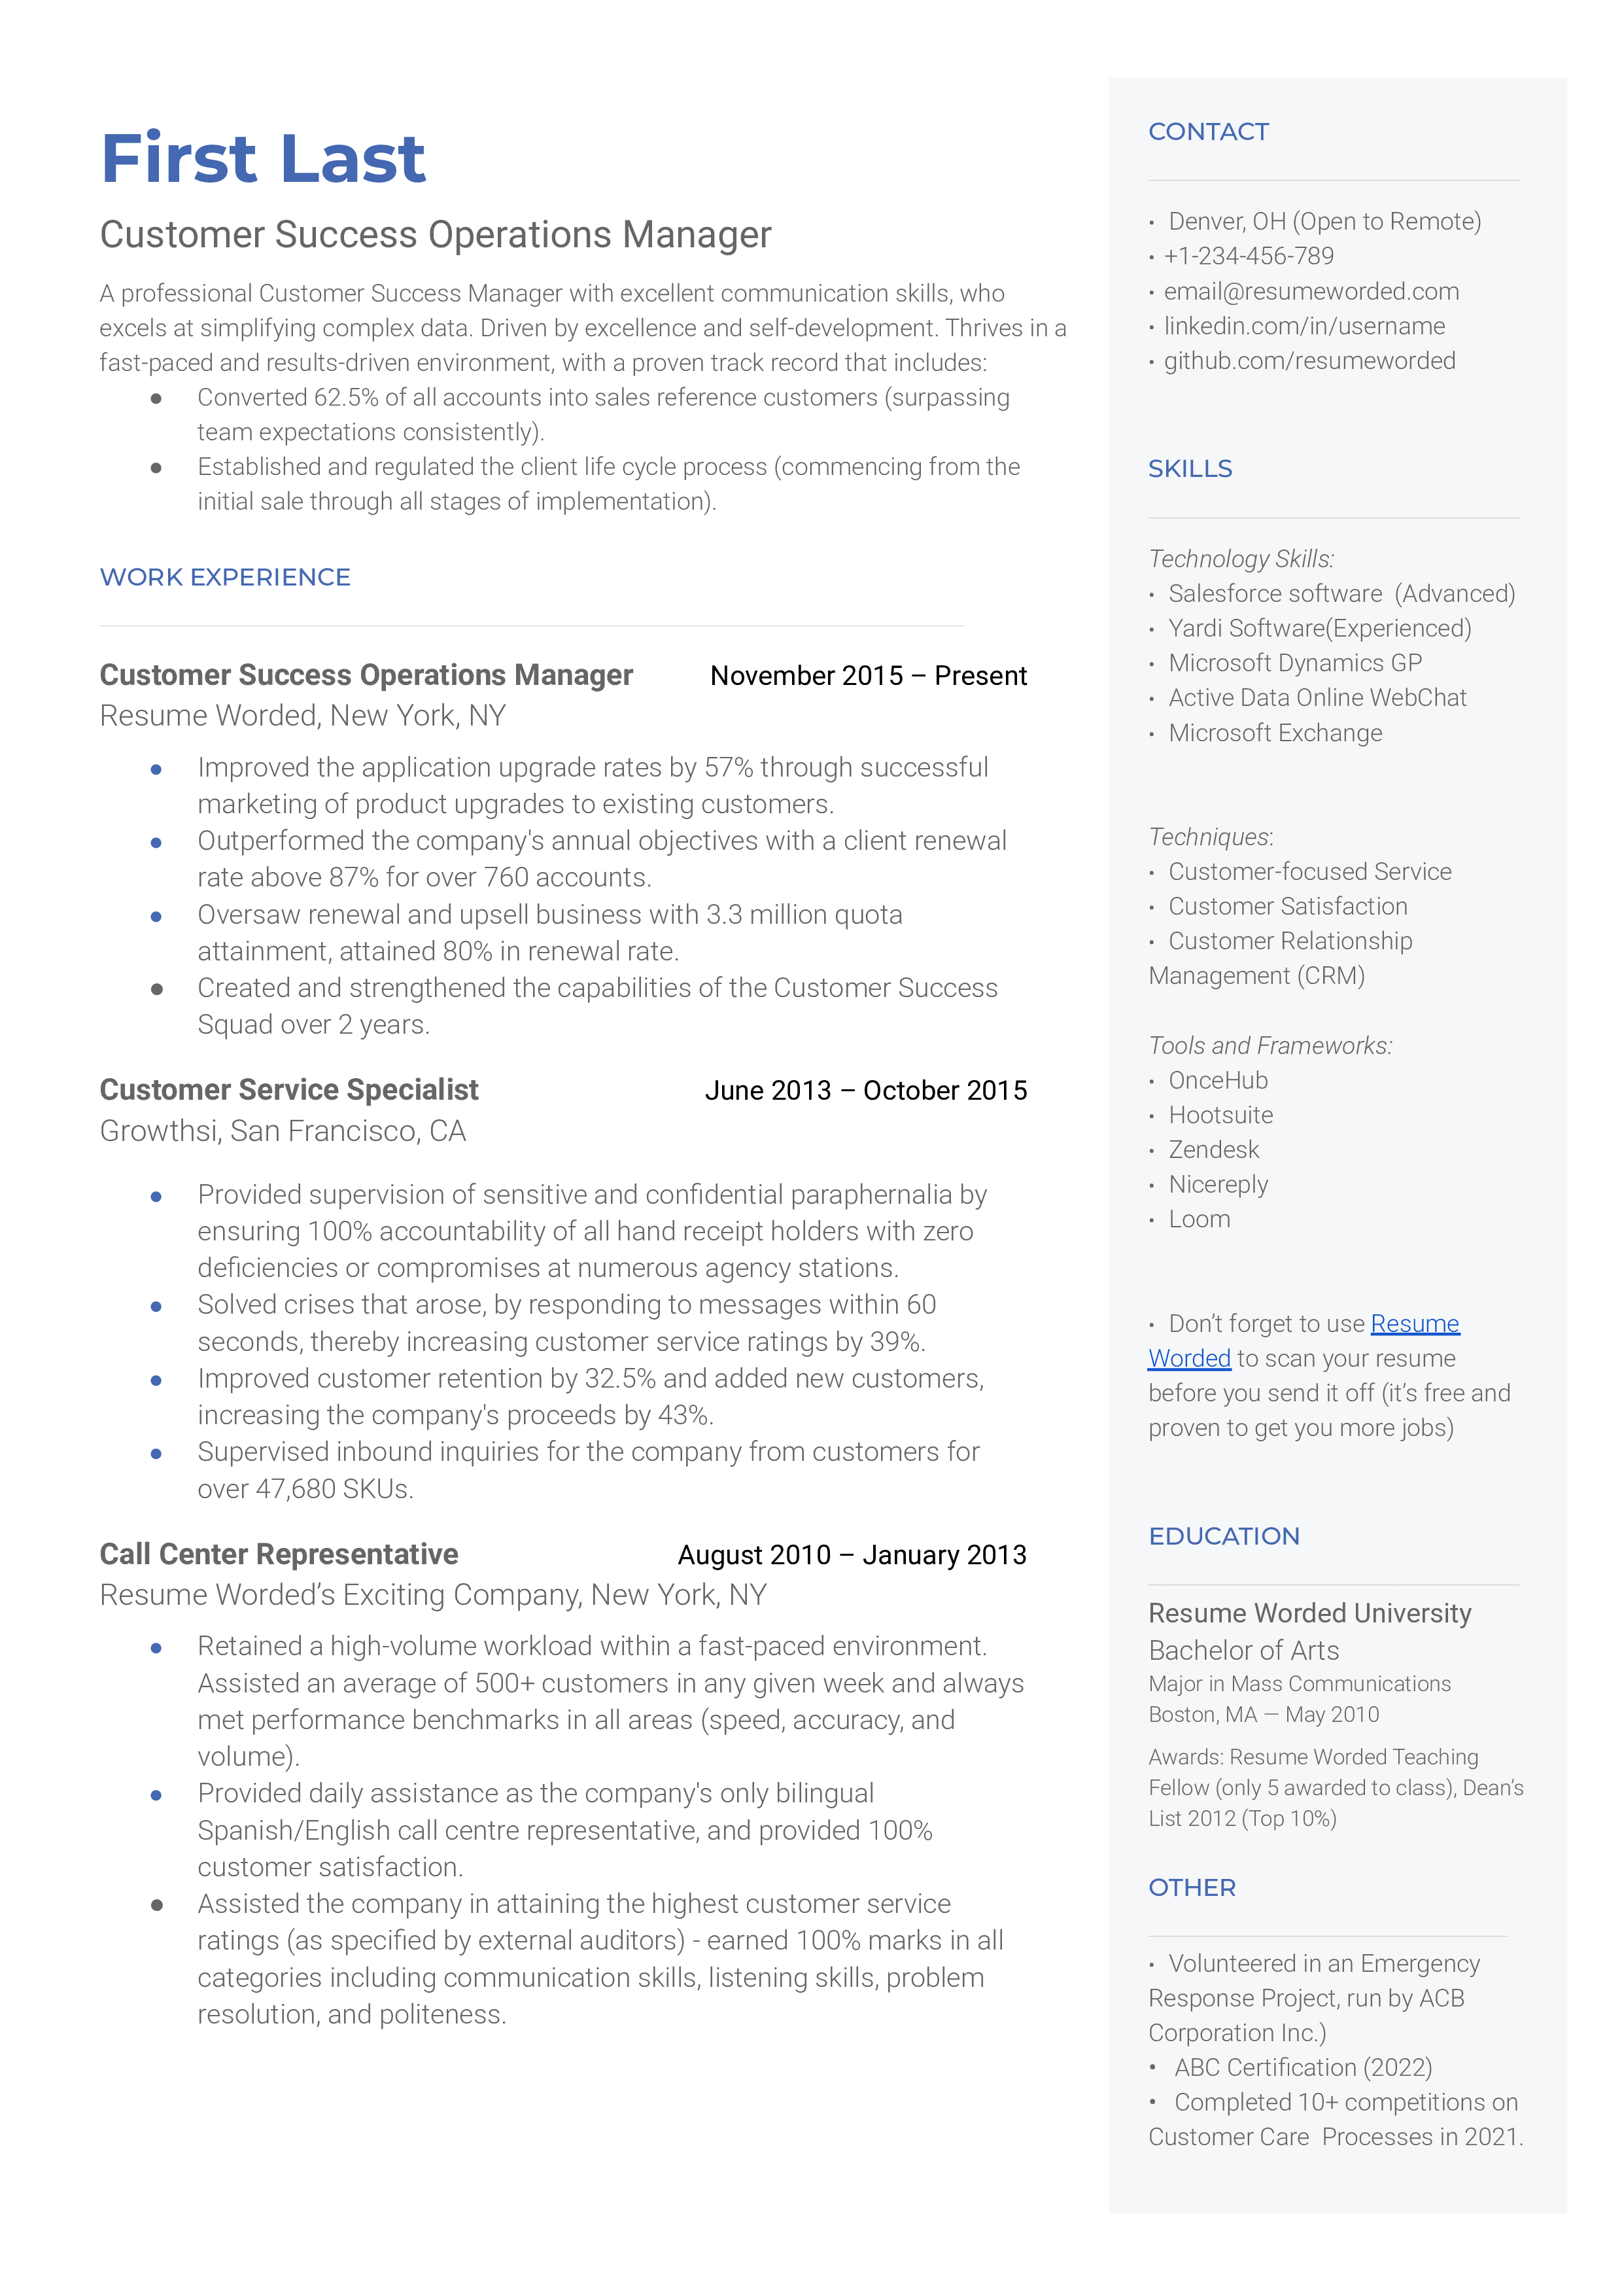 Customer Success Operations Manager Resume Template + Example